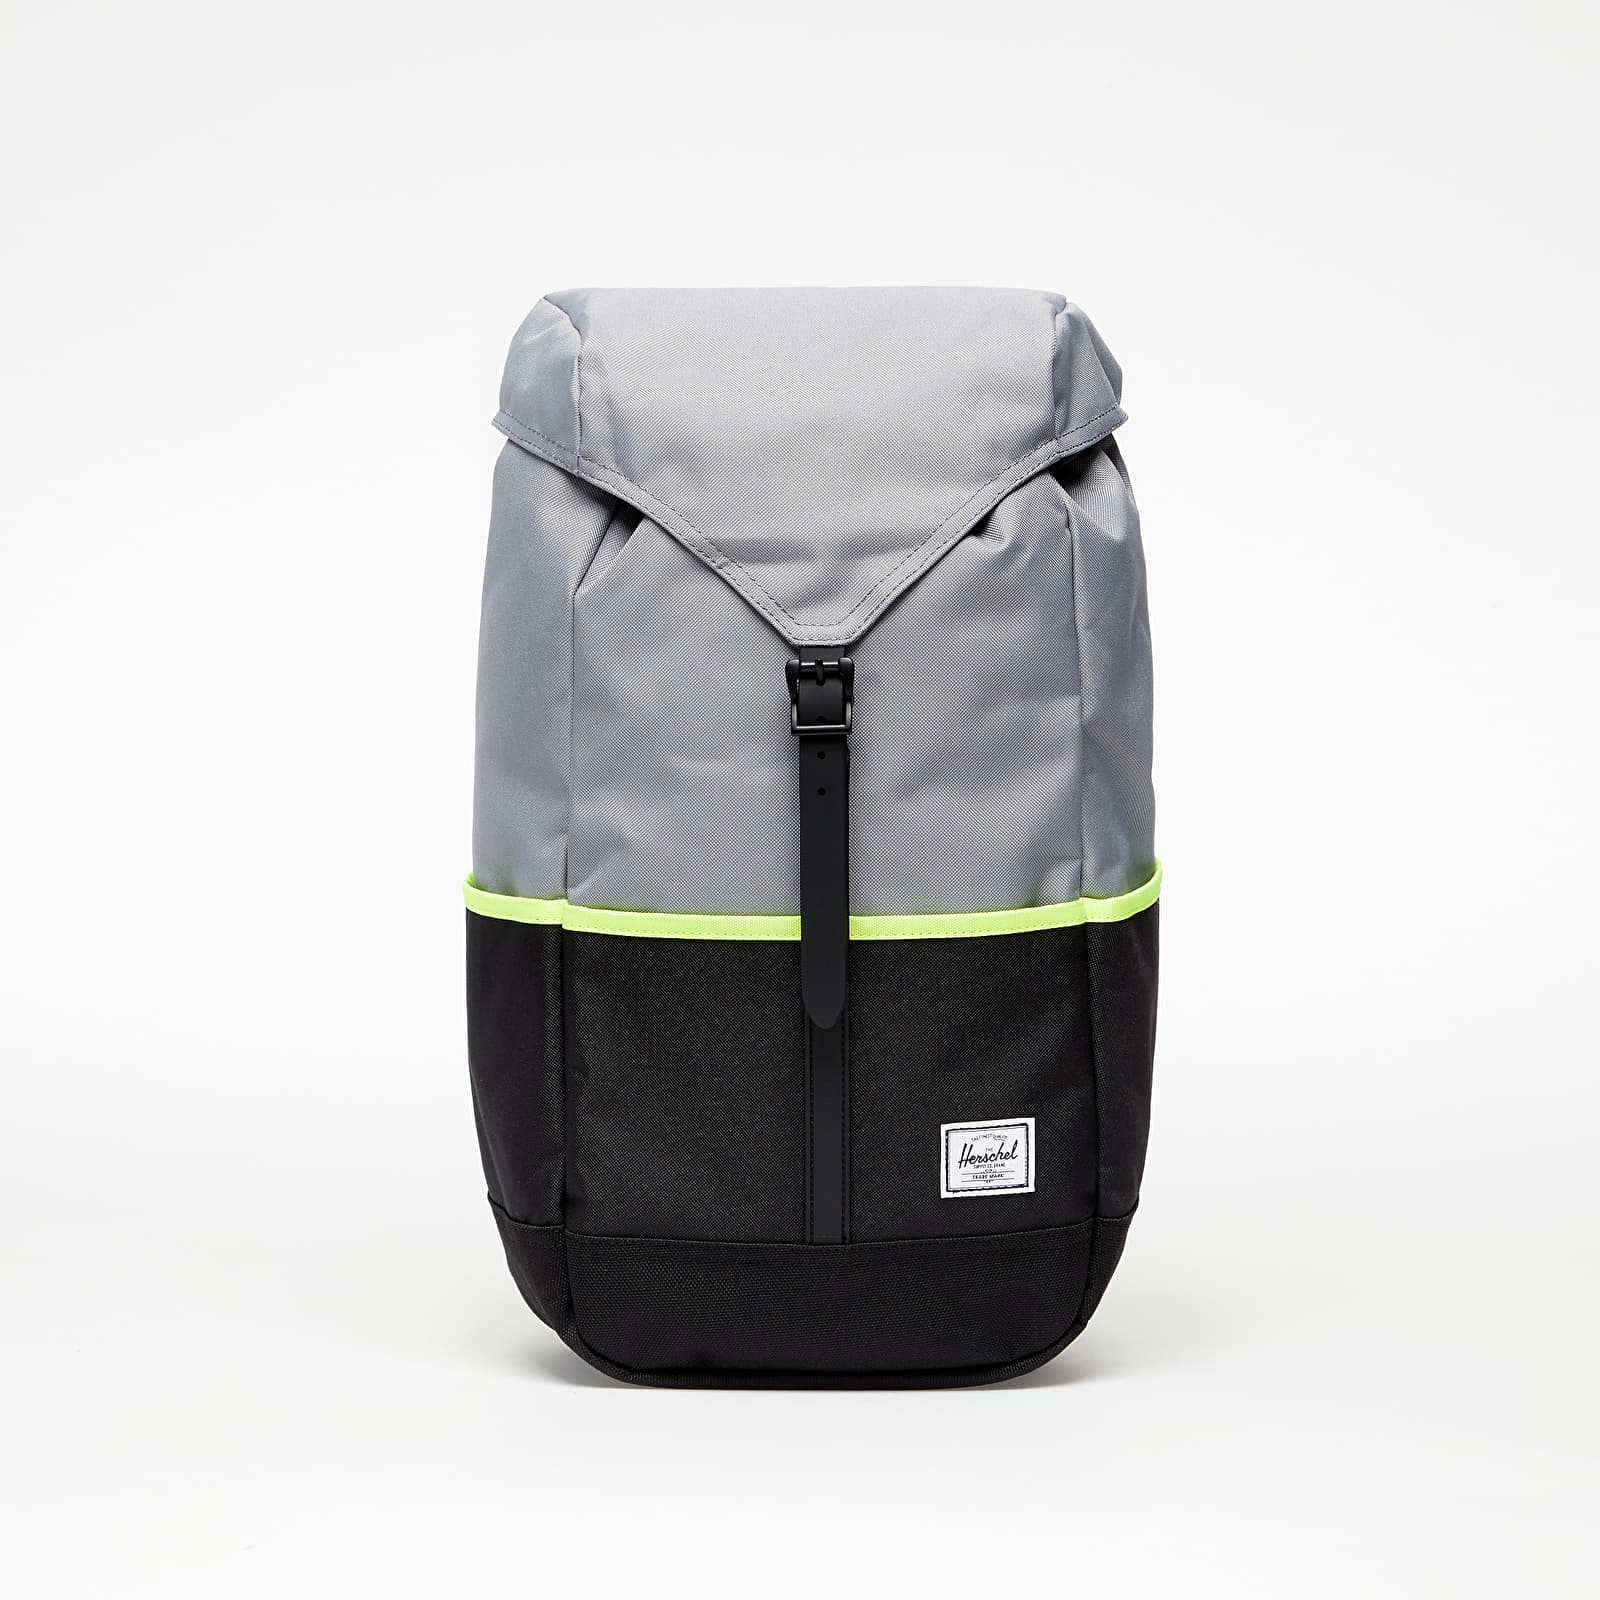 Batohy Herschel Supply Co. Thompson Pro Backpack Grey/ Black/ Safety Yellow